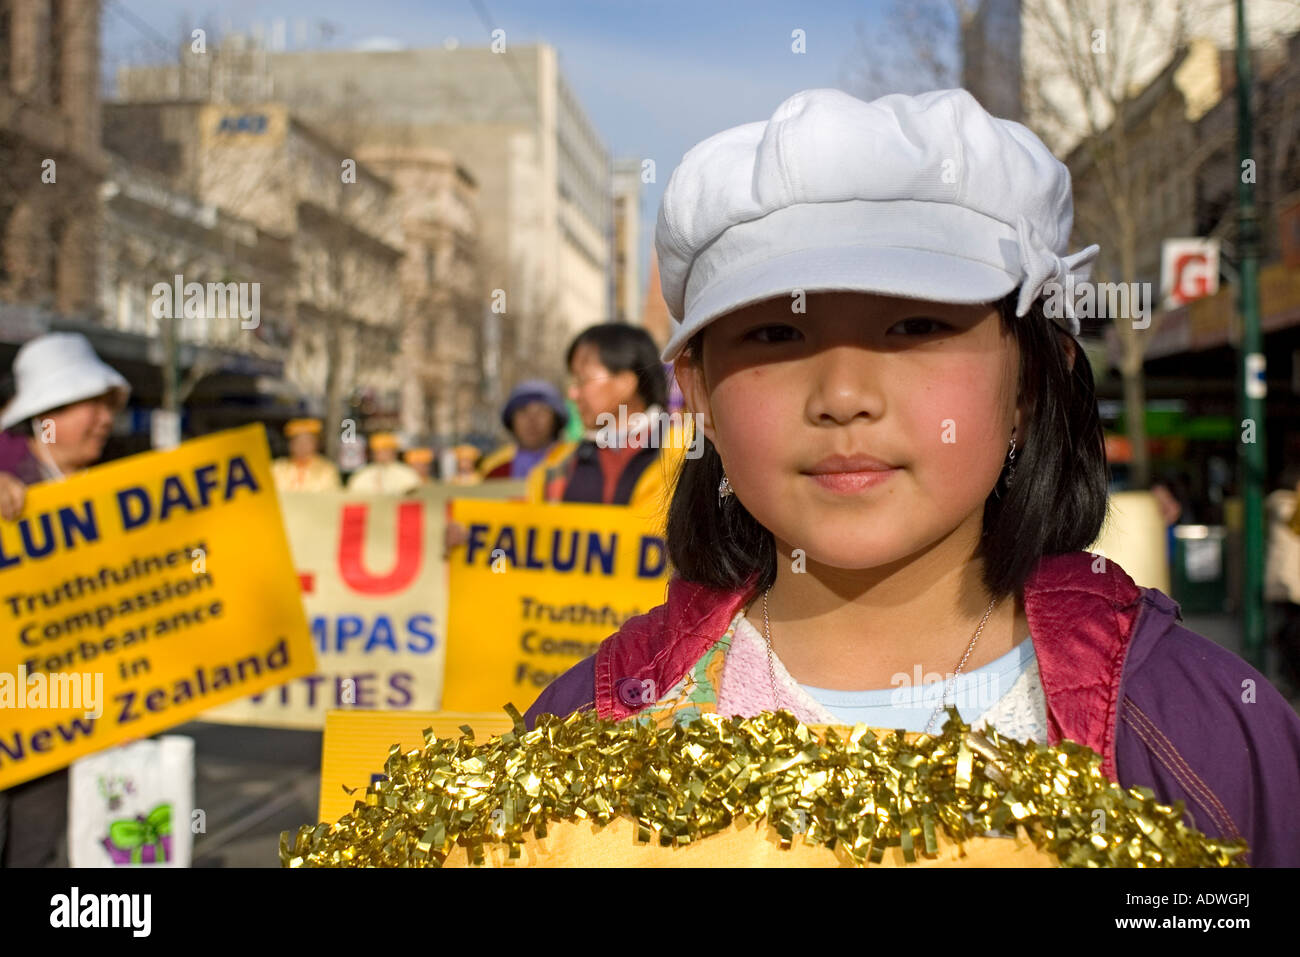 A Young Girl in a Falun Gong (Dafa) Parade, Calling for Human Rights in China. Melbourne, Australia. Stock Photo